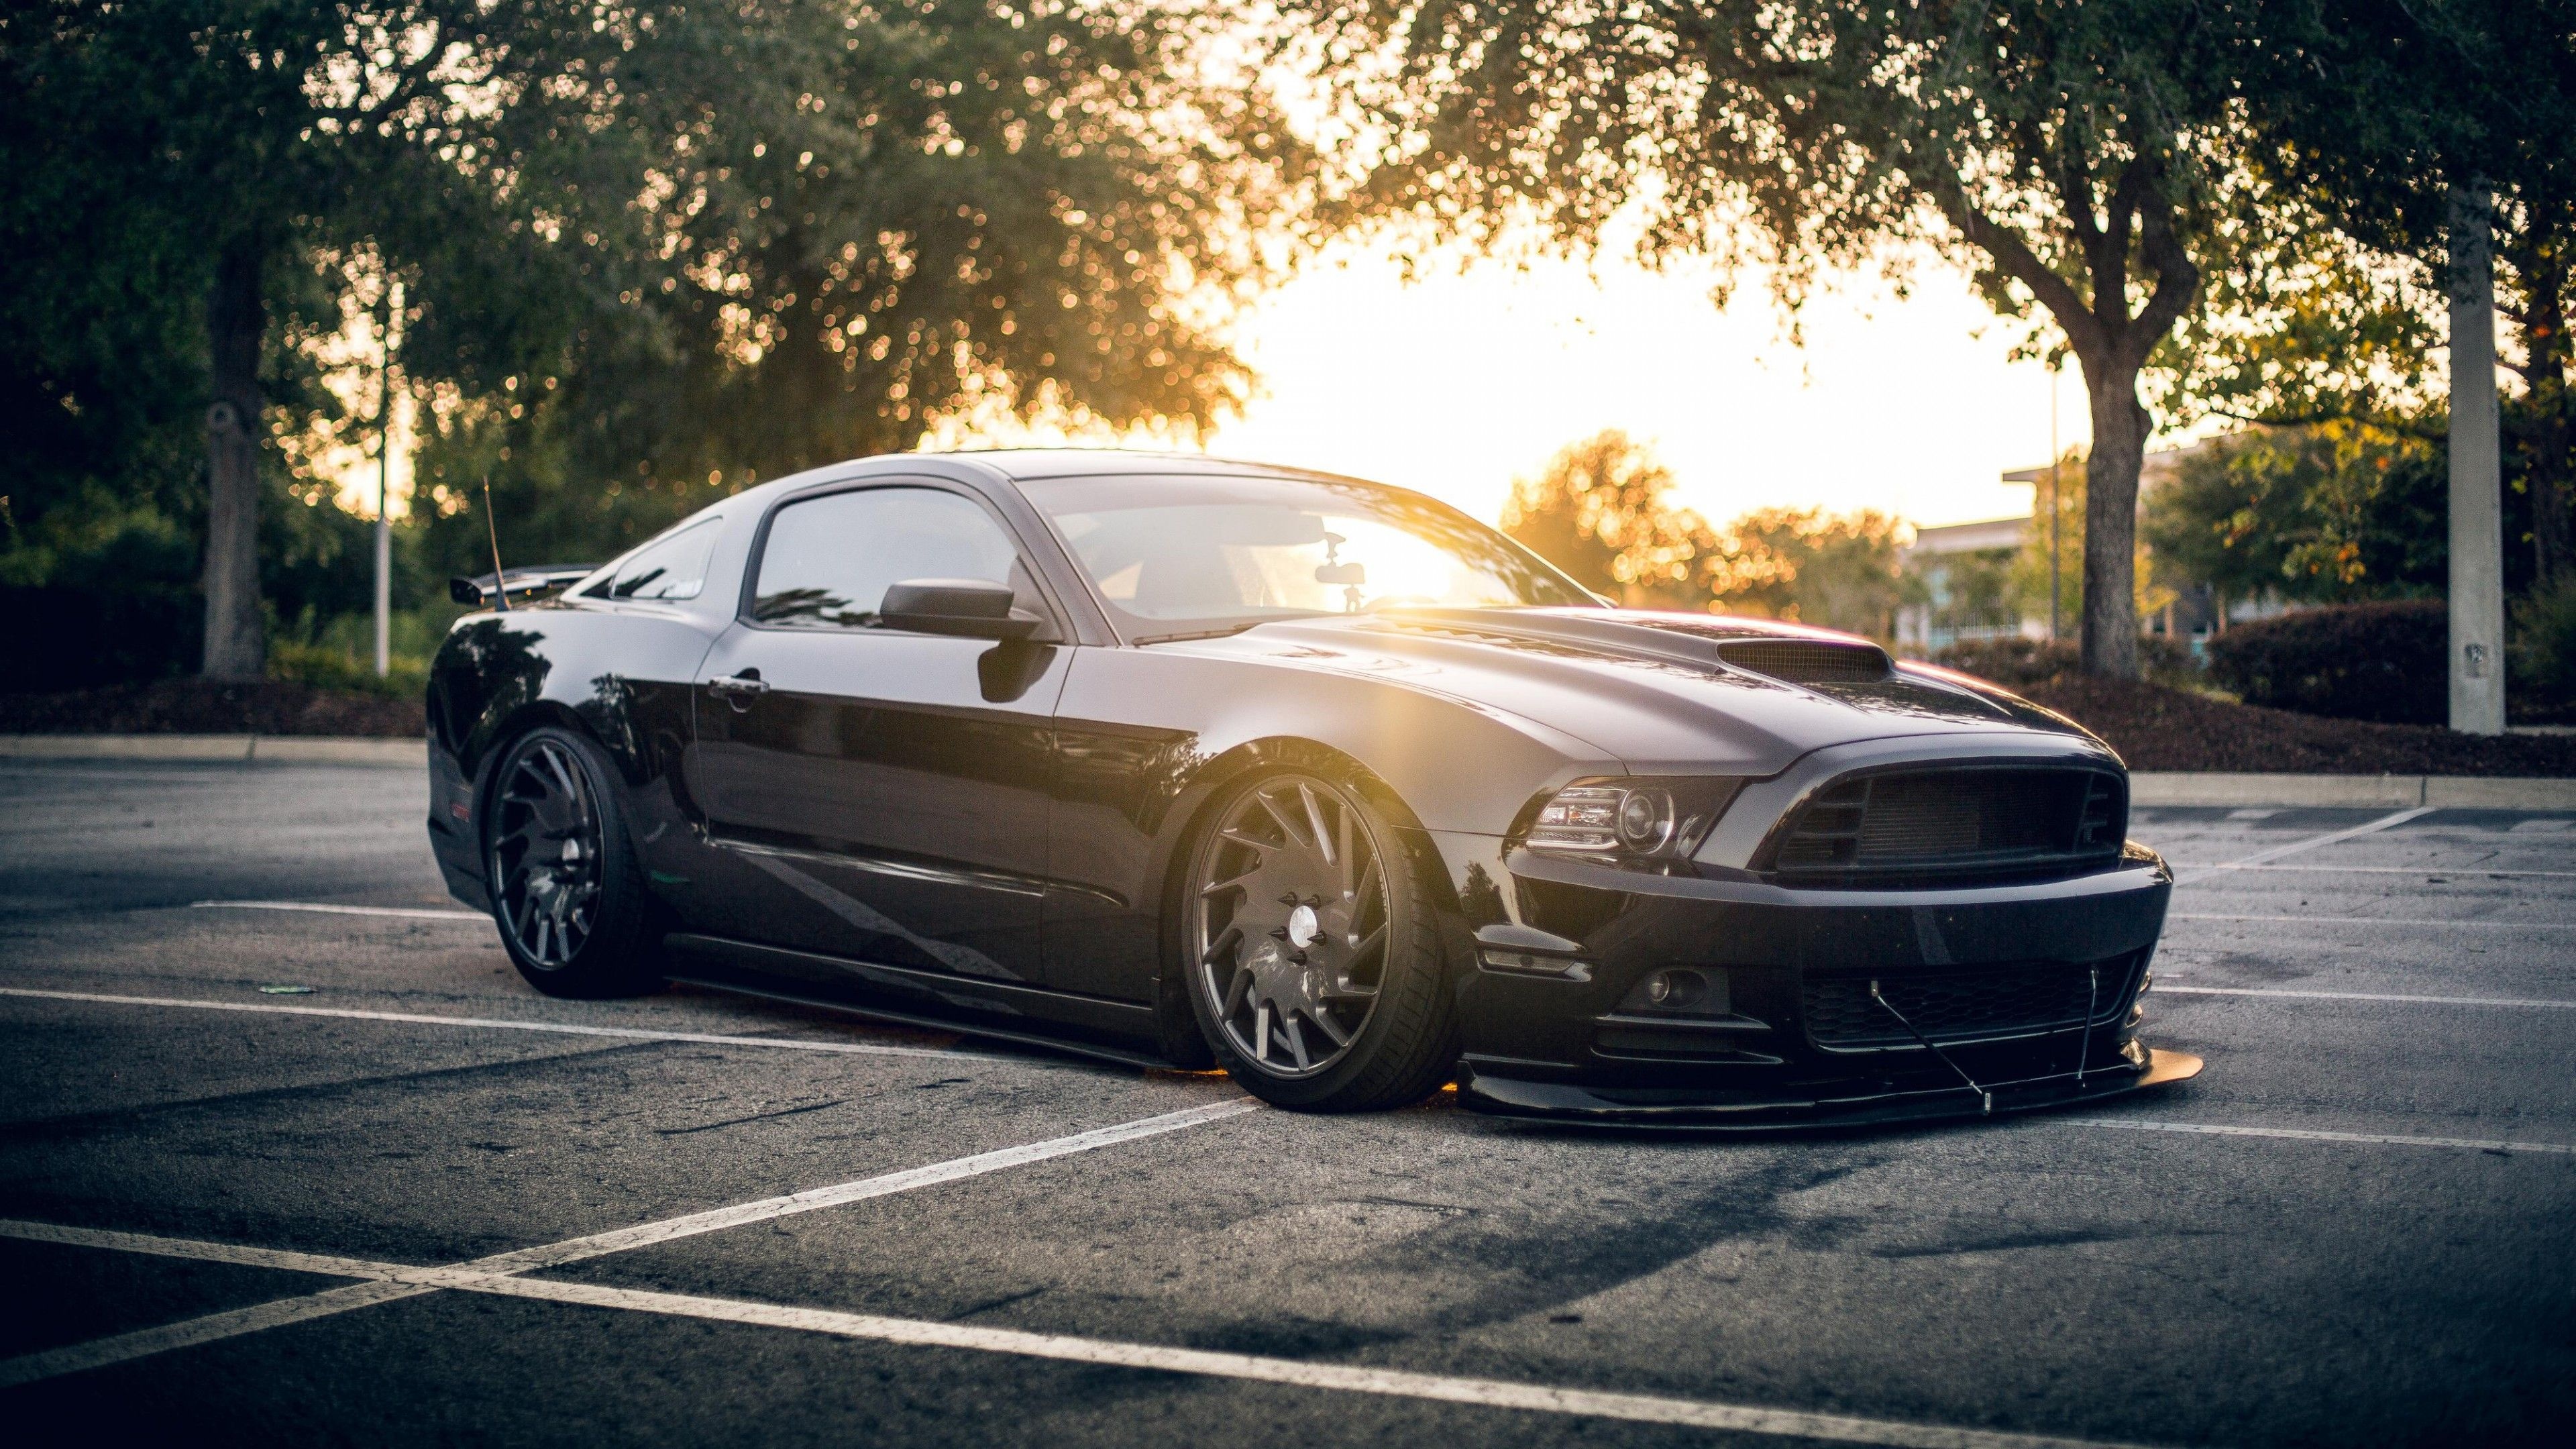 Mustang, High-resolution imagery, American icon, Auto enthusiast's dream, Horsepower, 3840x2160 4K Desktop